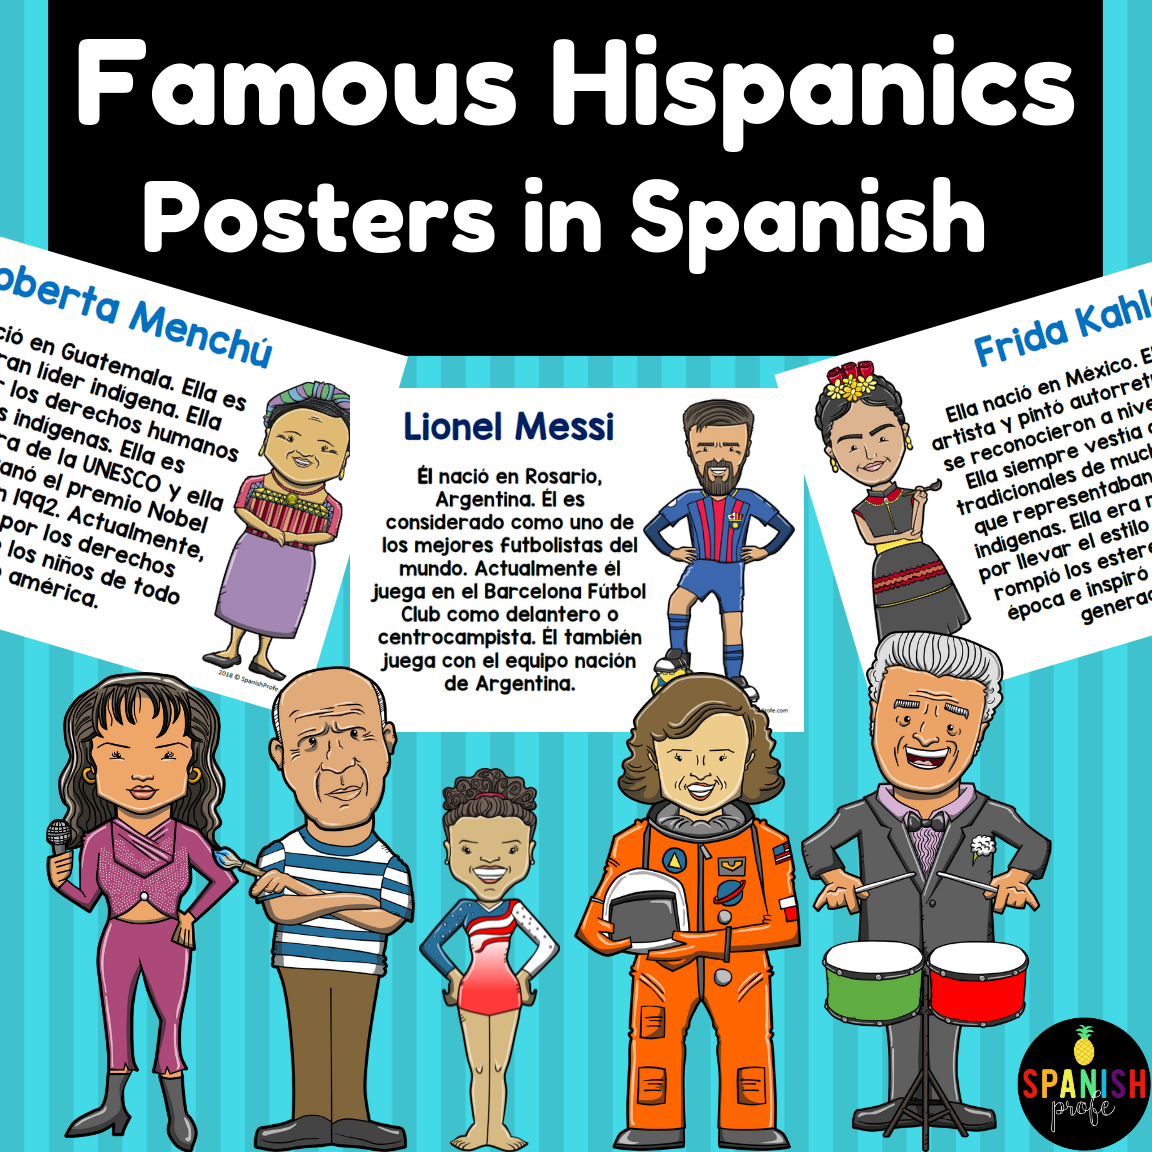 Hispanic Heritage Month Posters in Spanish (Carteles mes de herencia